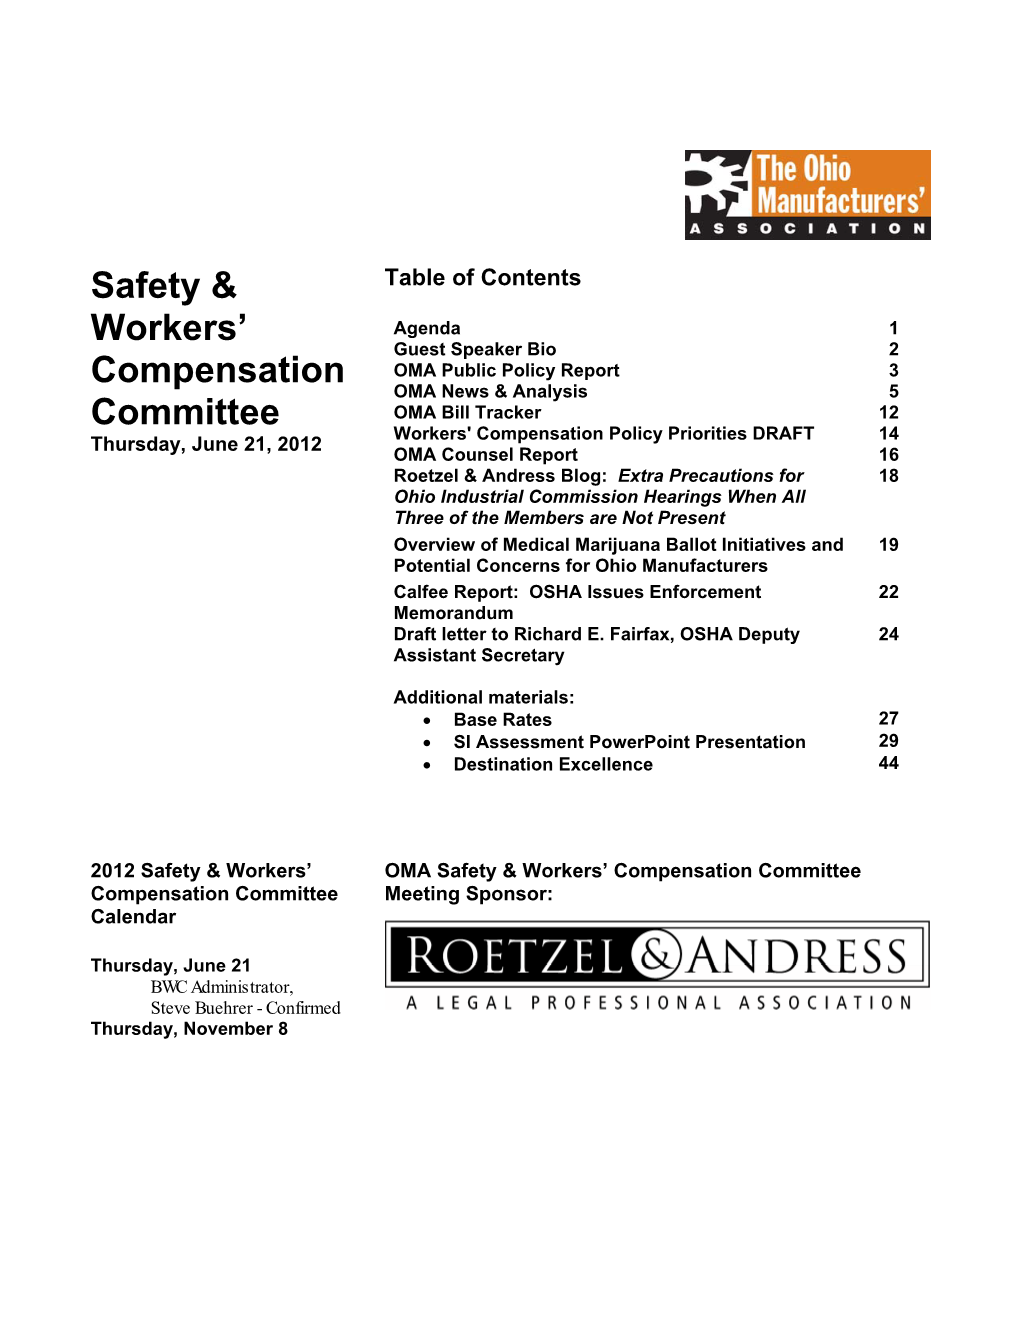 Safety & Workers' Compensation Committee